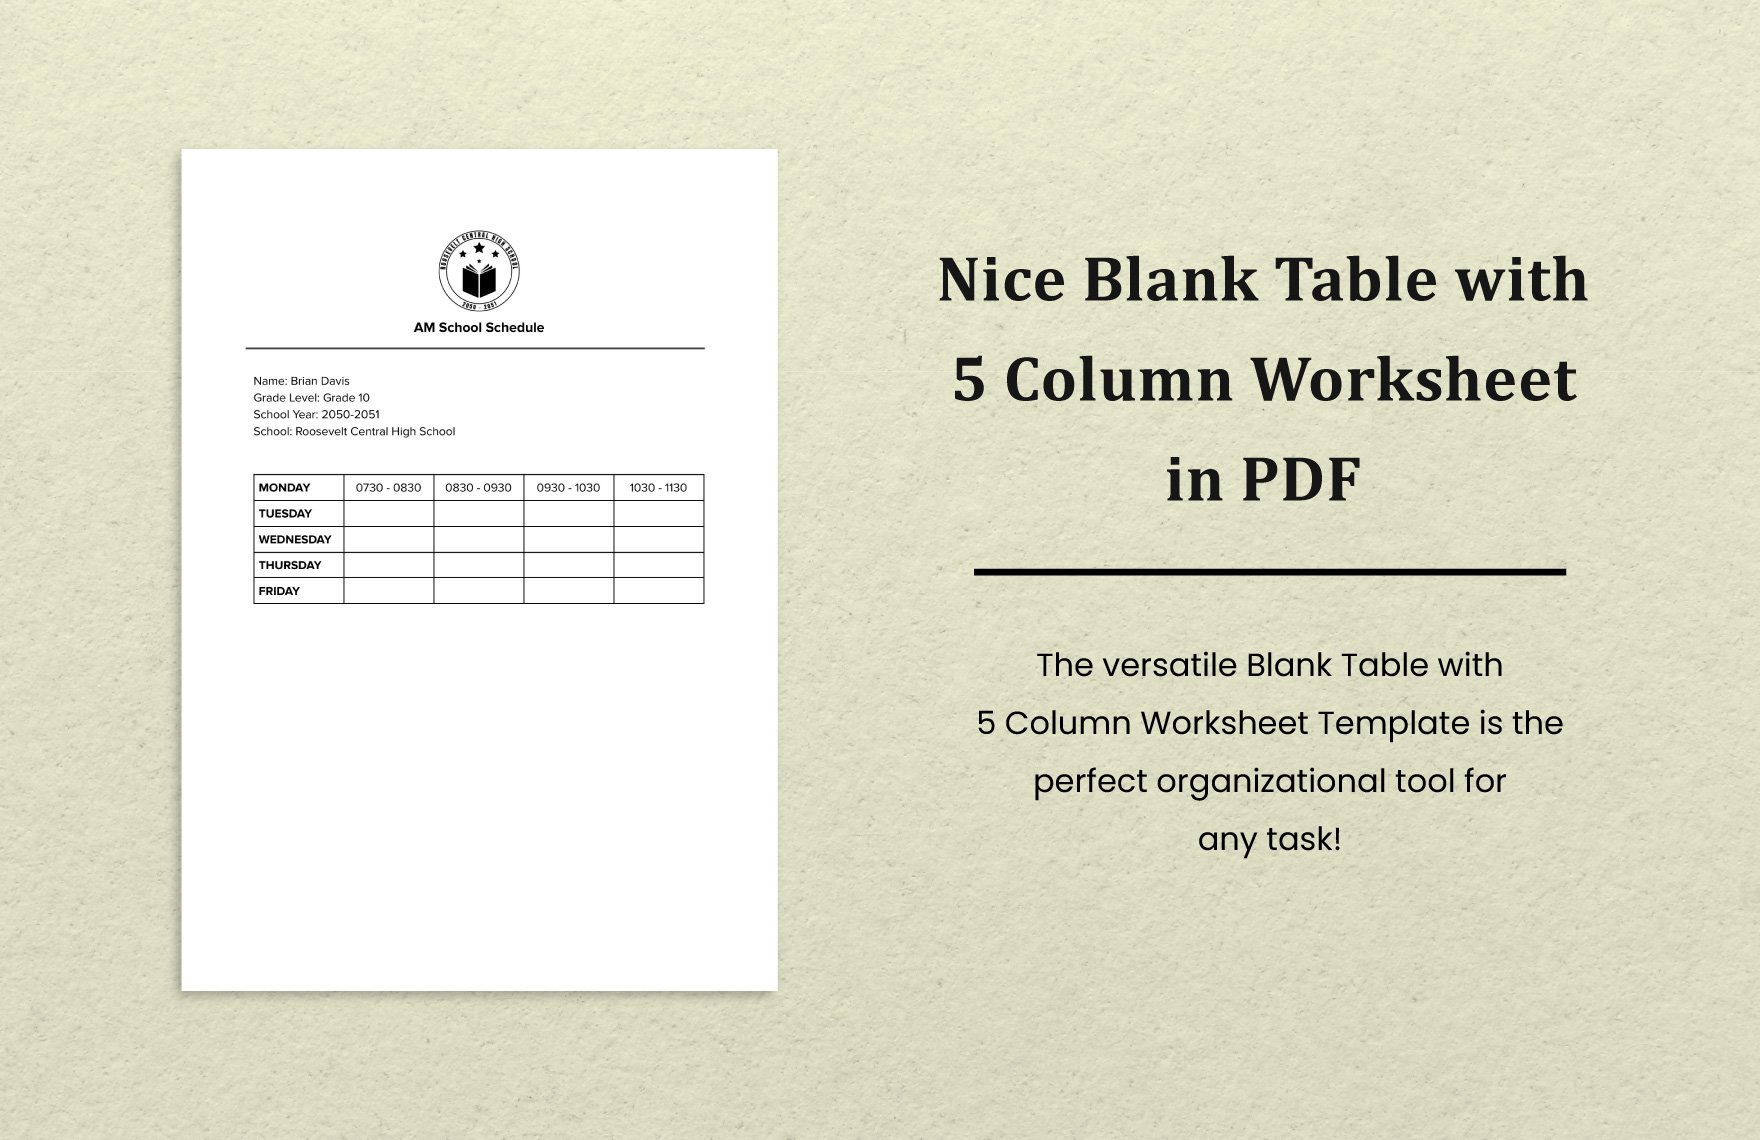 Nice Blank Table with 5 Column Worksheet in PDF